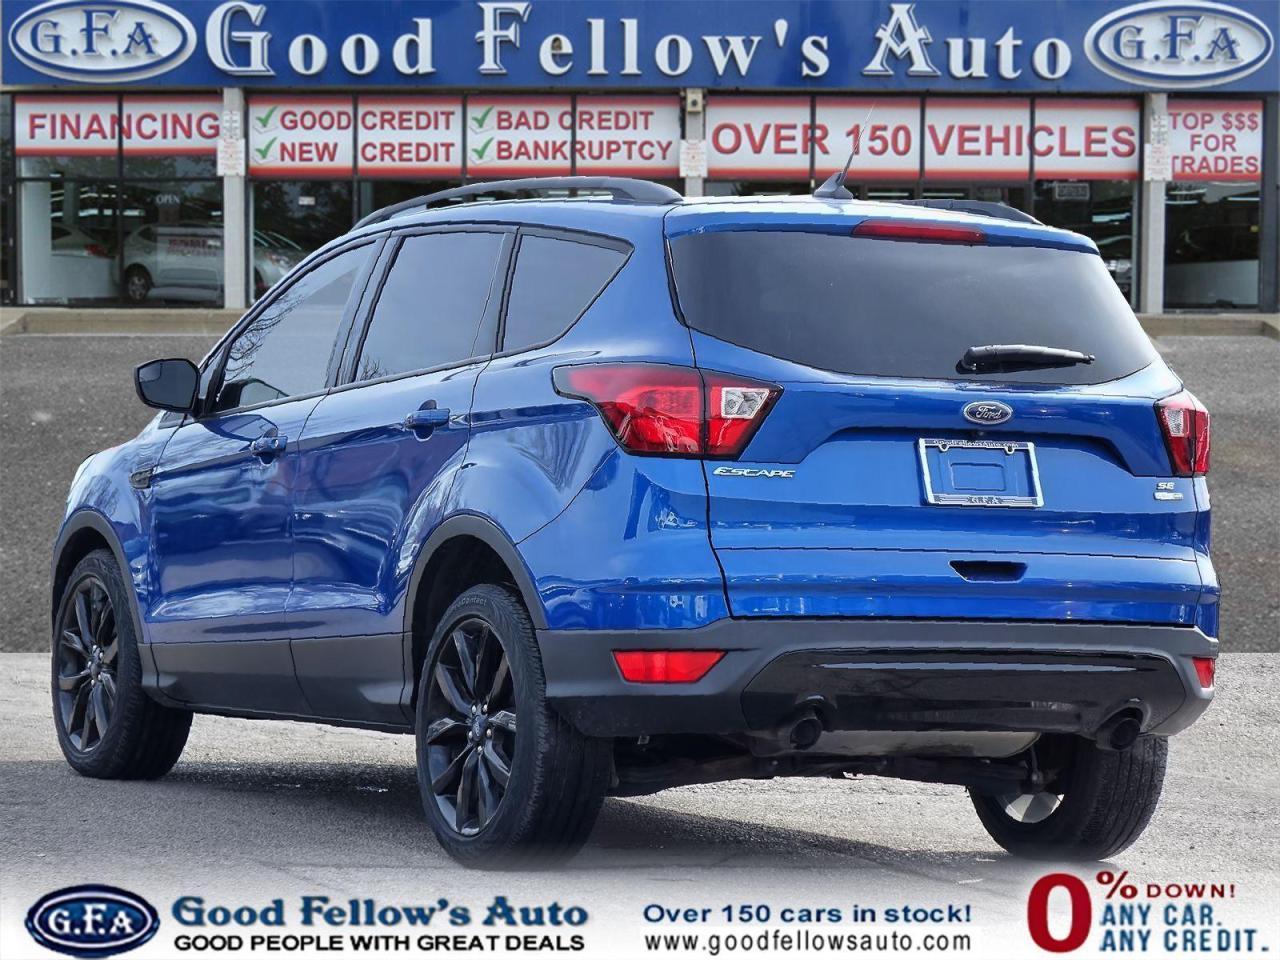 2019 Ford Escape SE MODEL, AWD, REARVIEW CAMERA, HEATED SEATS, POWE - Photo #5